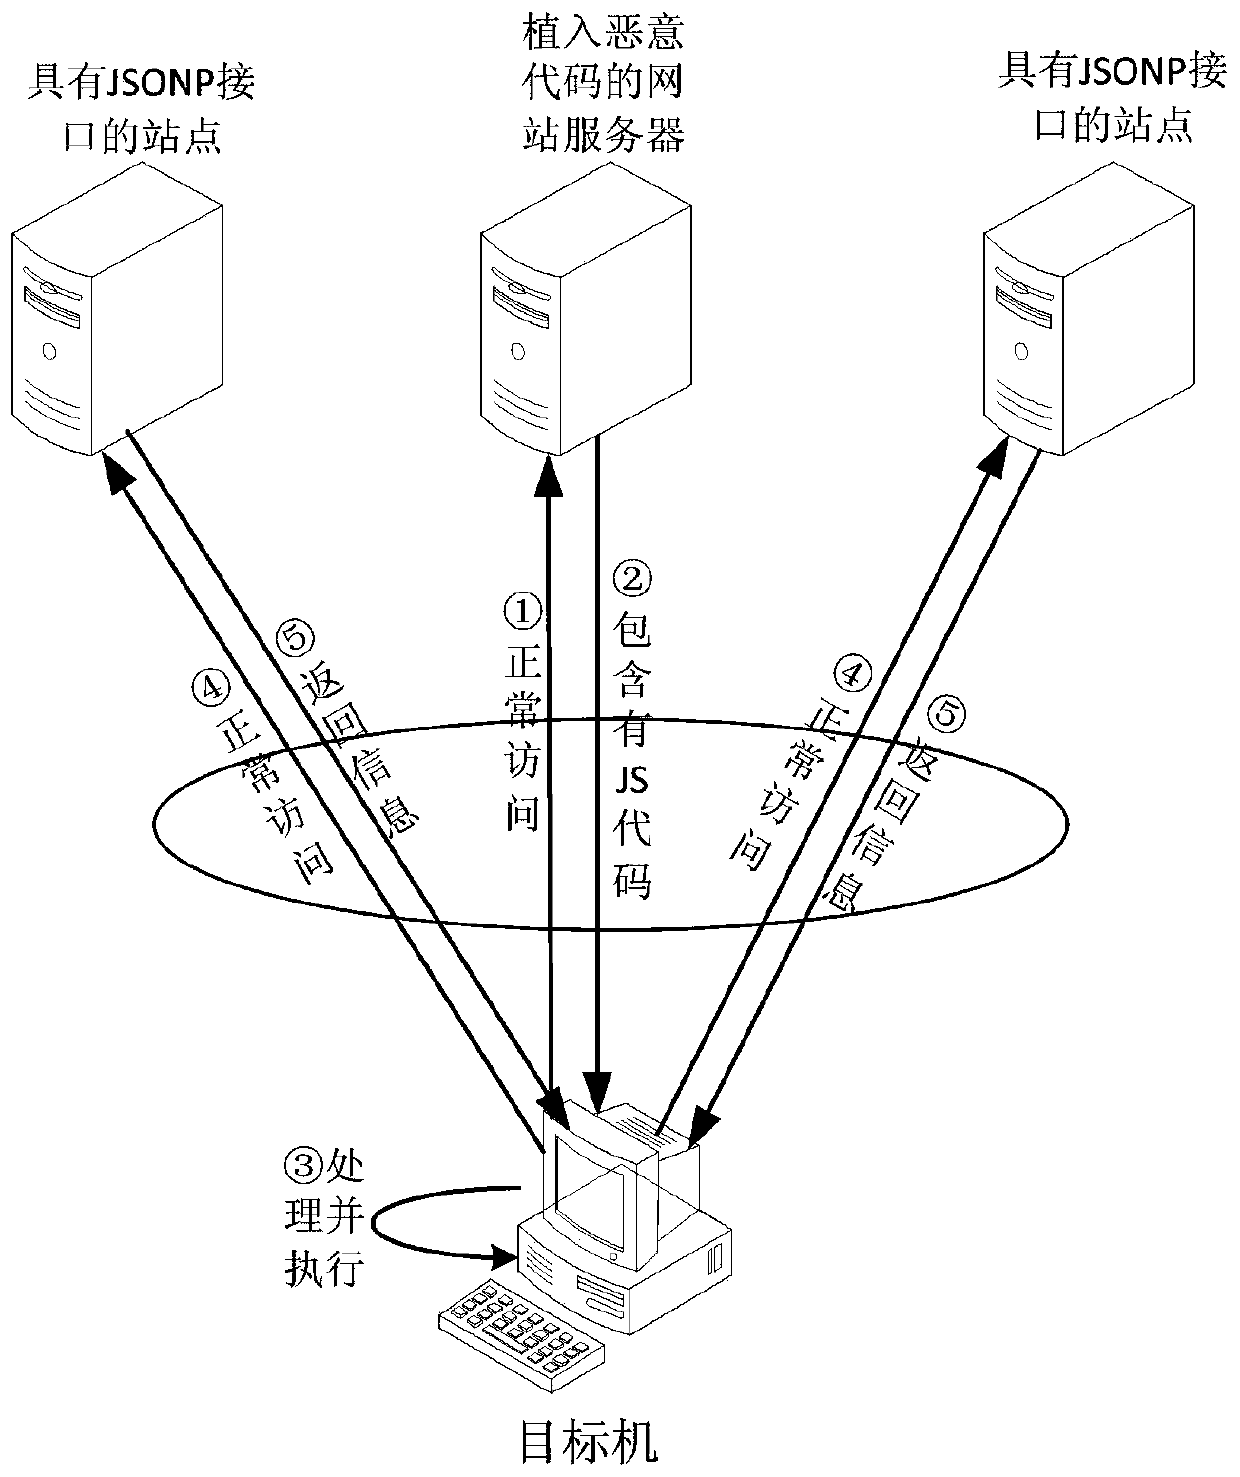 A network traceability method based on jsonp cross-domain information acquisition